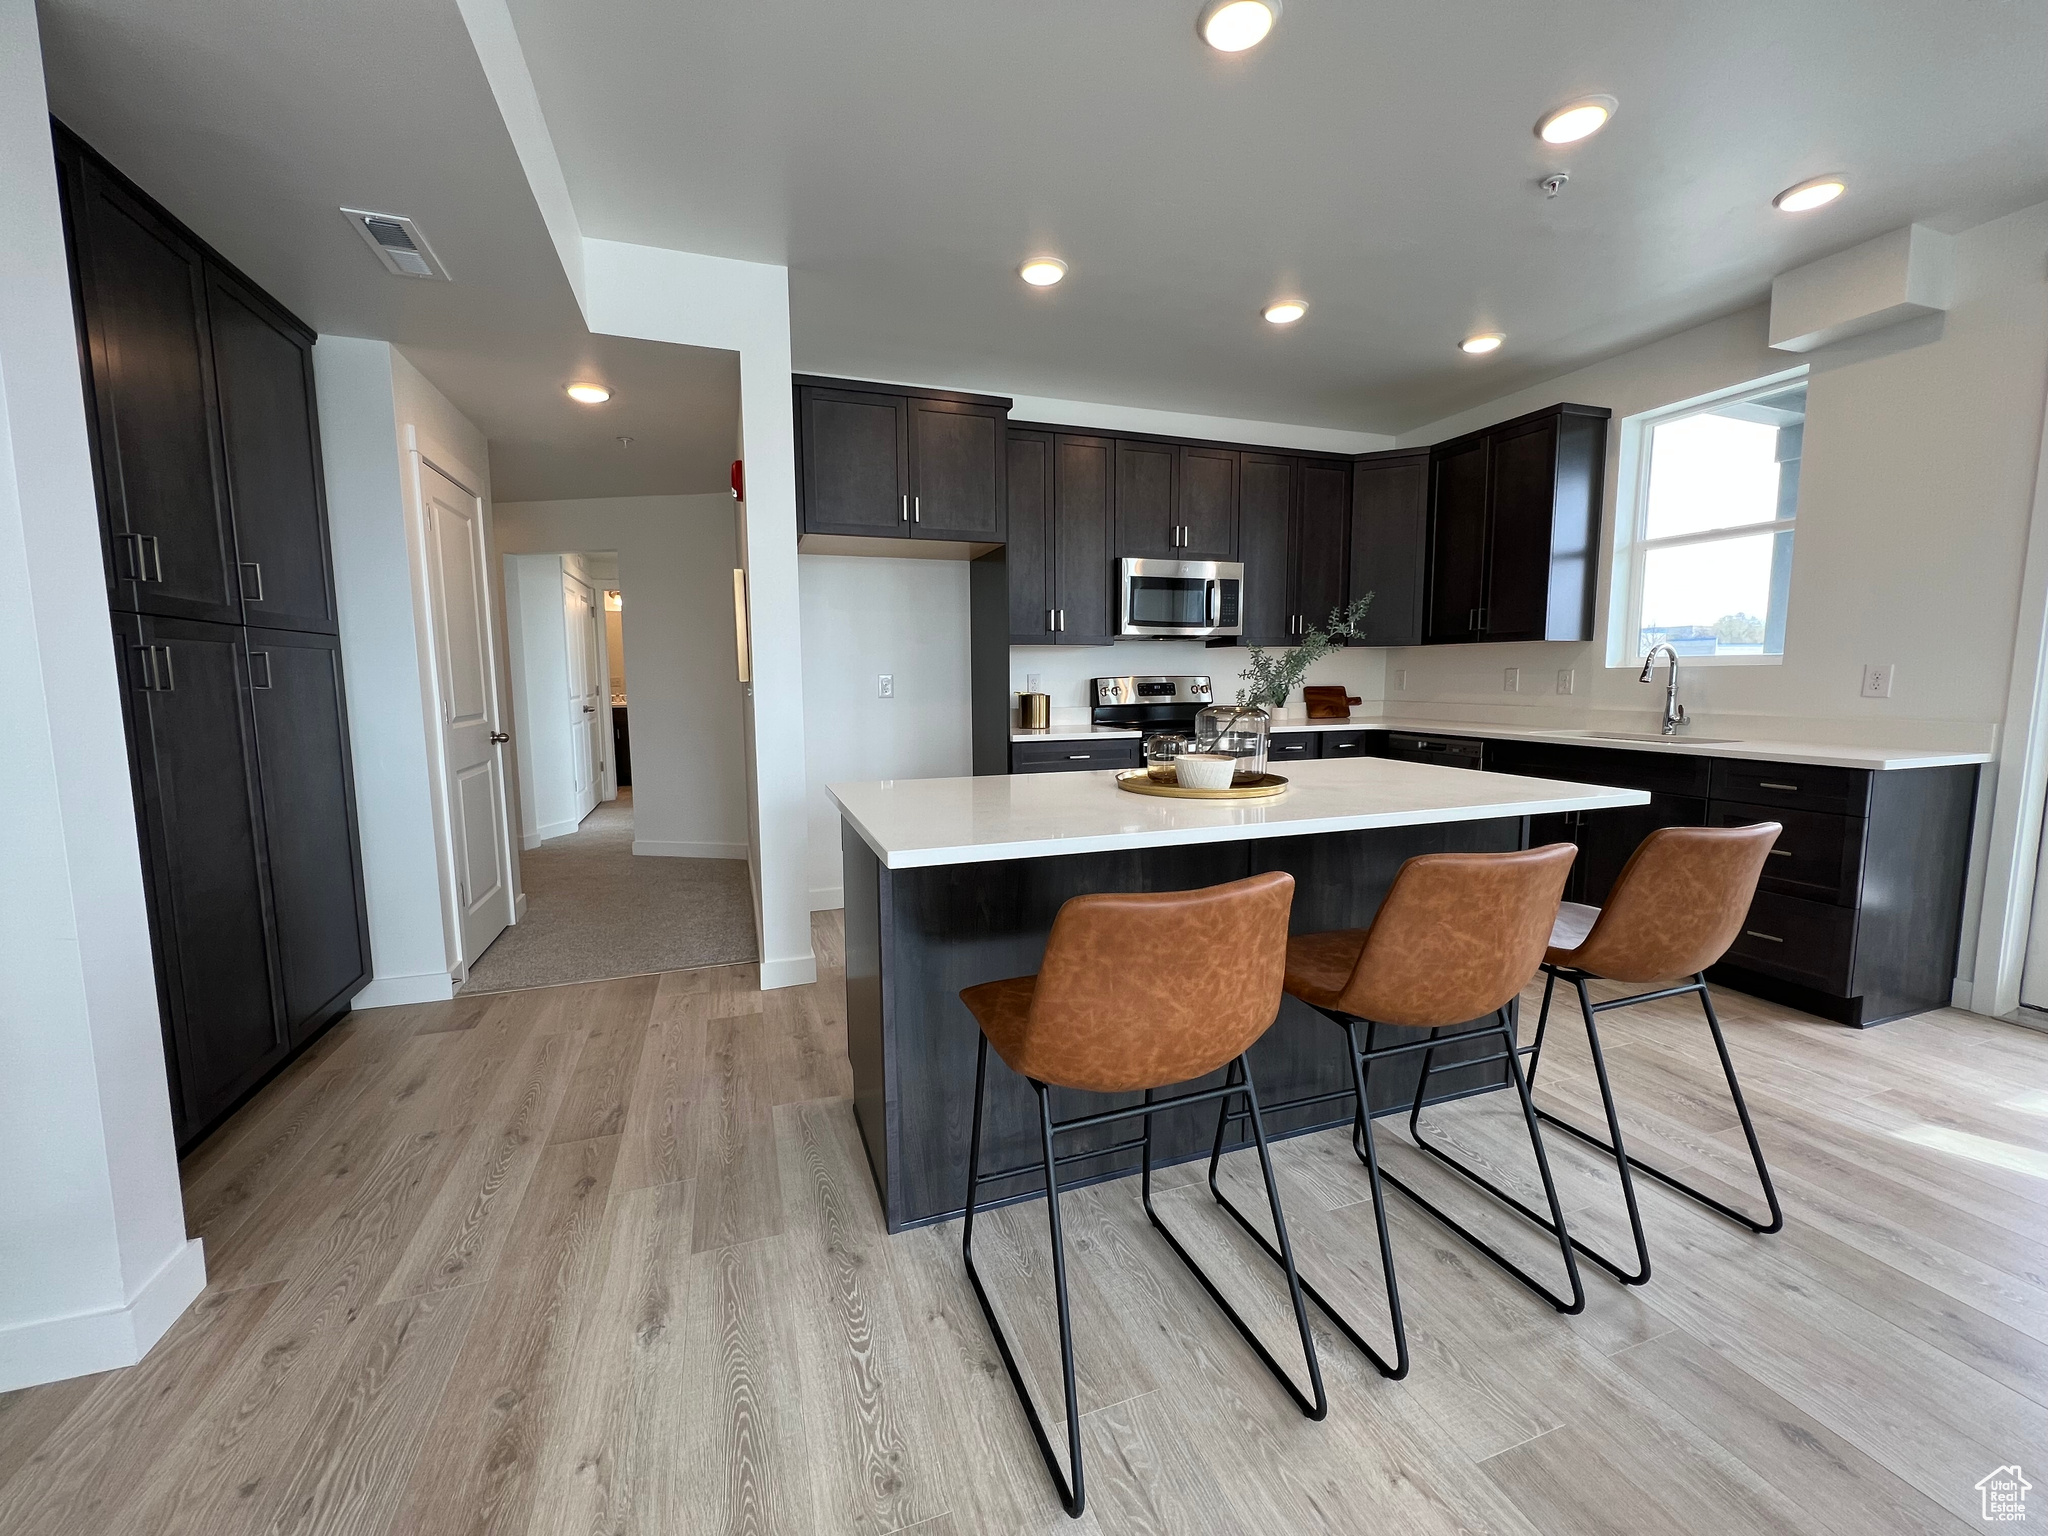 Kitchen with a kitchen breakfast bar, light hardwood / wood-style flooring, appliances with stainless steel finishes, sink, and a kitchen island